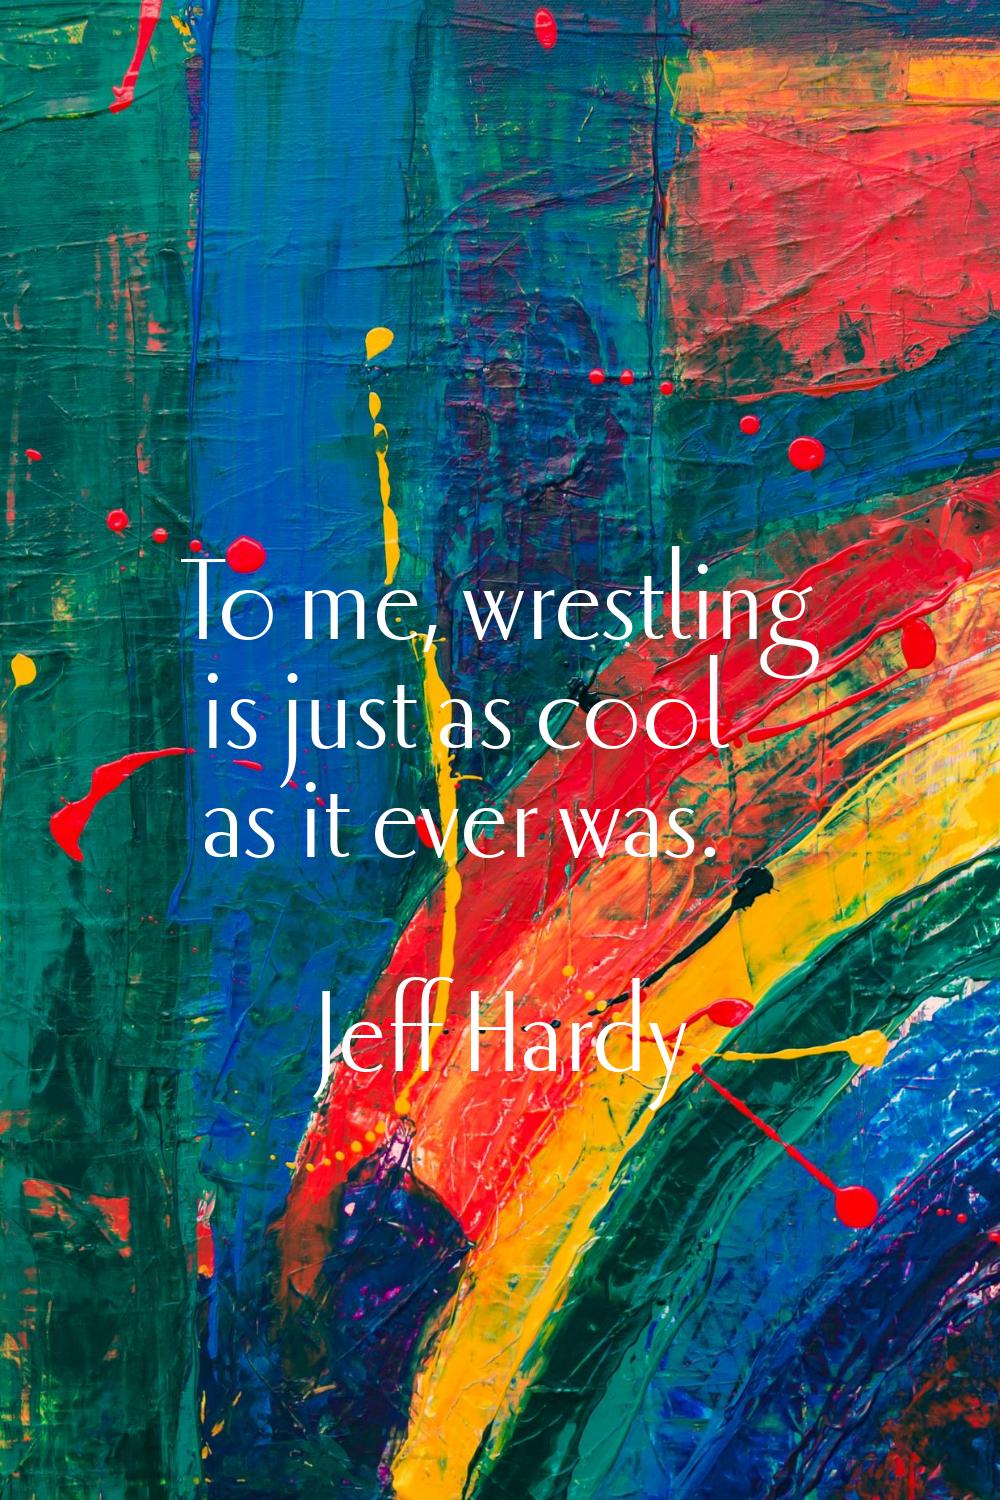 To me, wrestling is just as cool as it ever was.